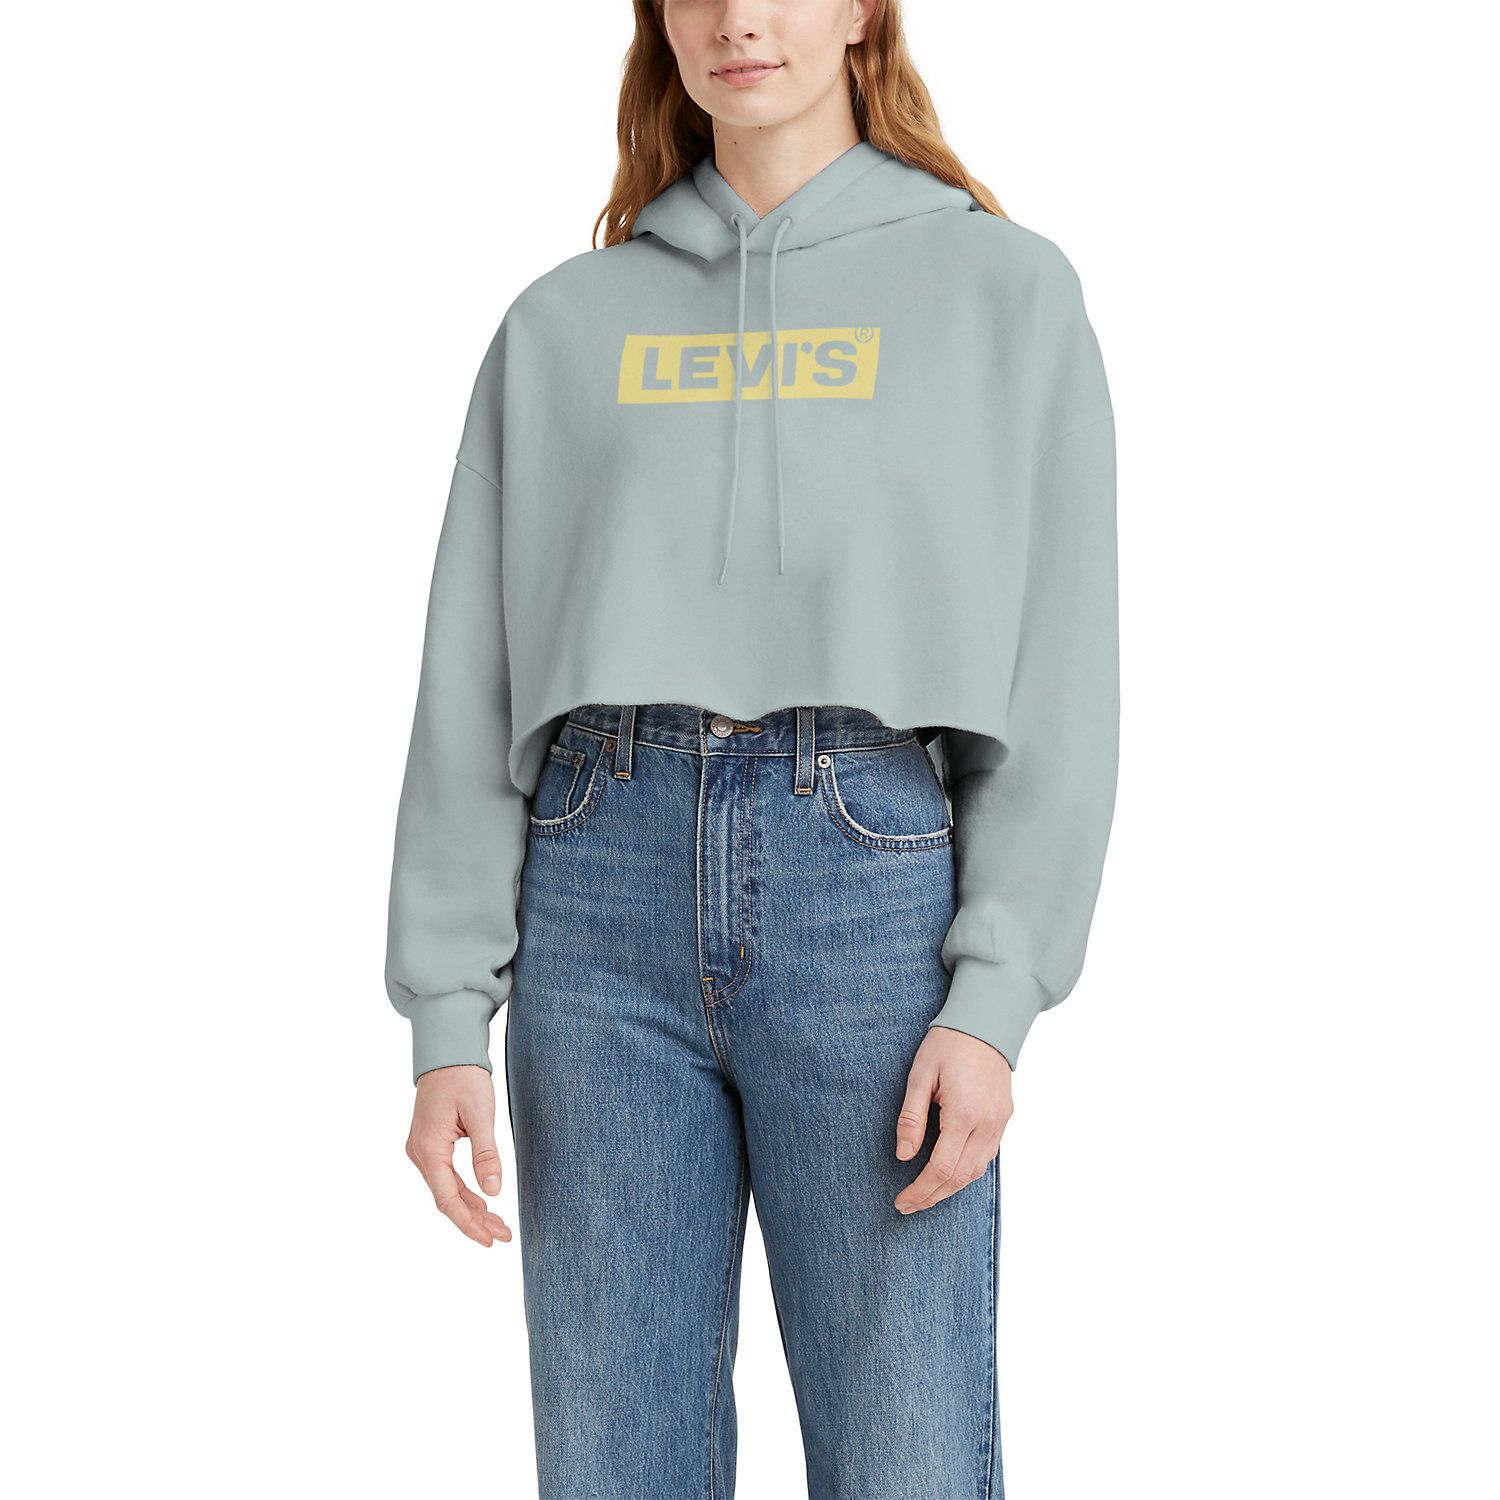 Image for Levi's Women's Cropped Graphic Hoodie at Kohl's.